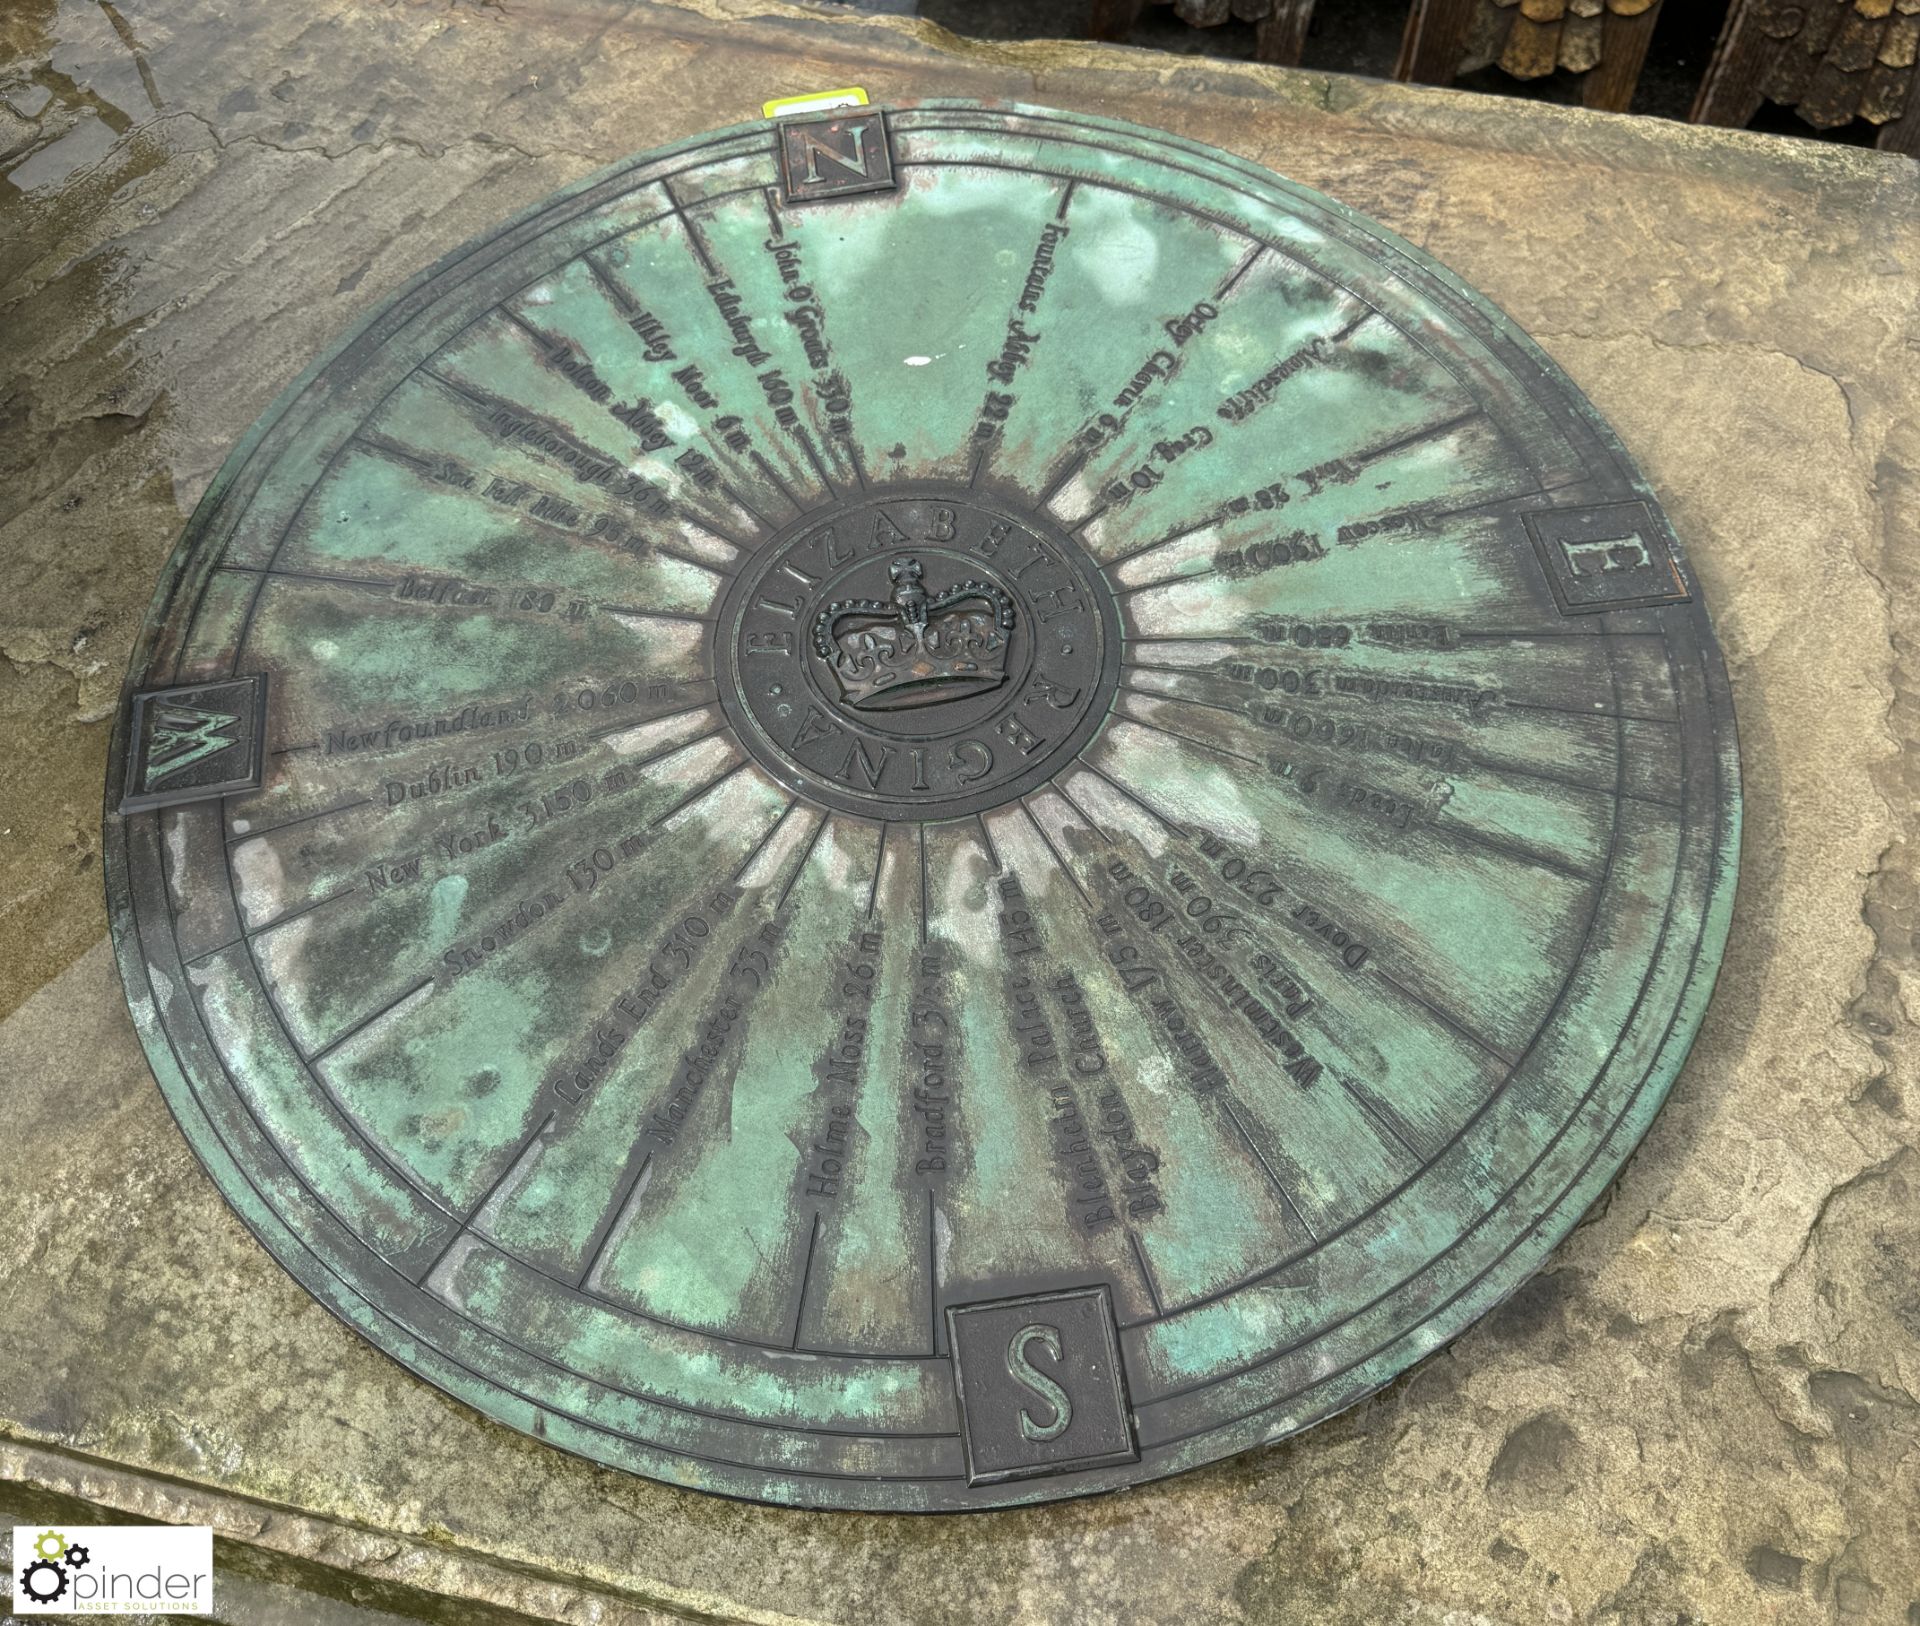 A large bronze Plaque depicting the 4 points of a compass, North, East, South, West, with a crown